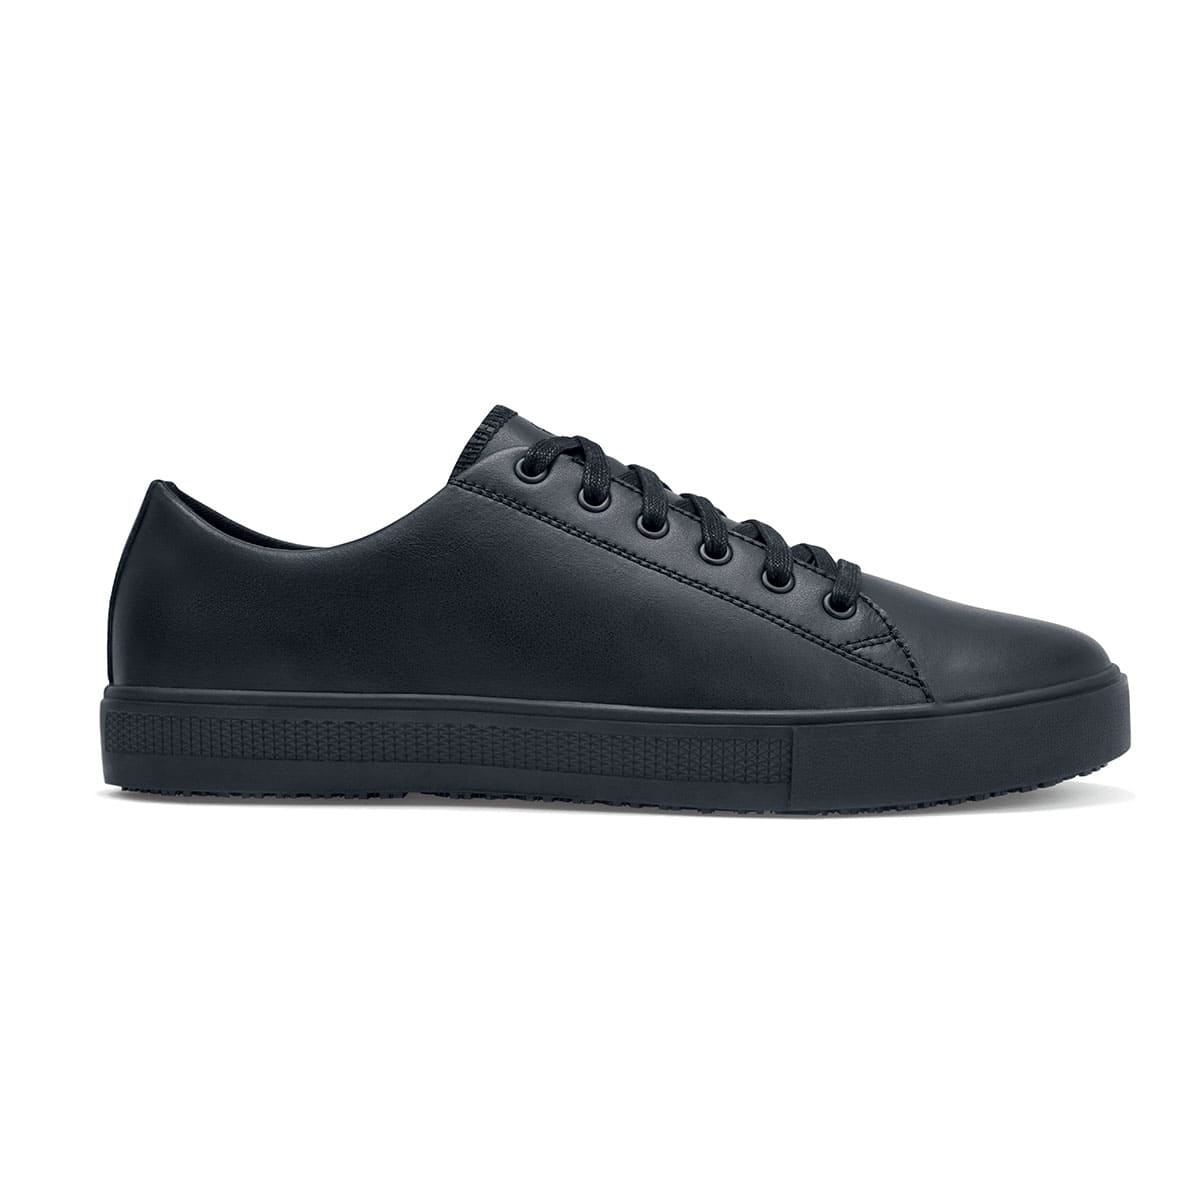 The Old School Low-Rider Black Gladiator Outsole from Shoes For Crews is a slip resistant lace-up shoe designed to provide confort throughout the day, seen from the right.